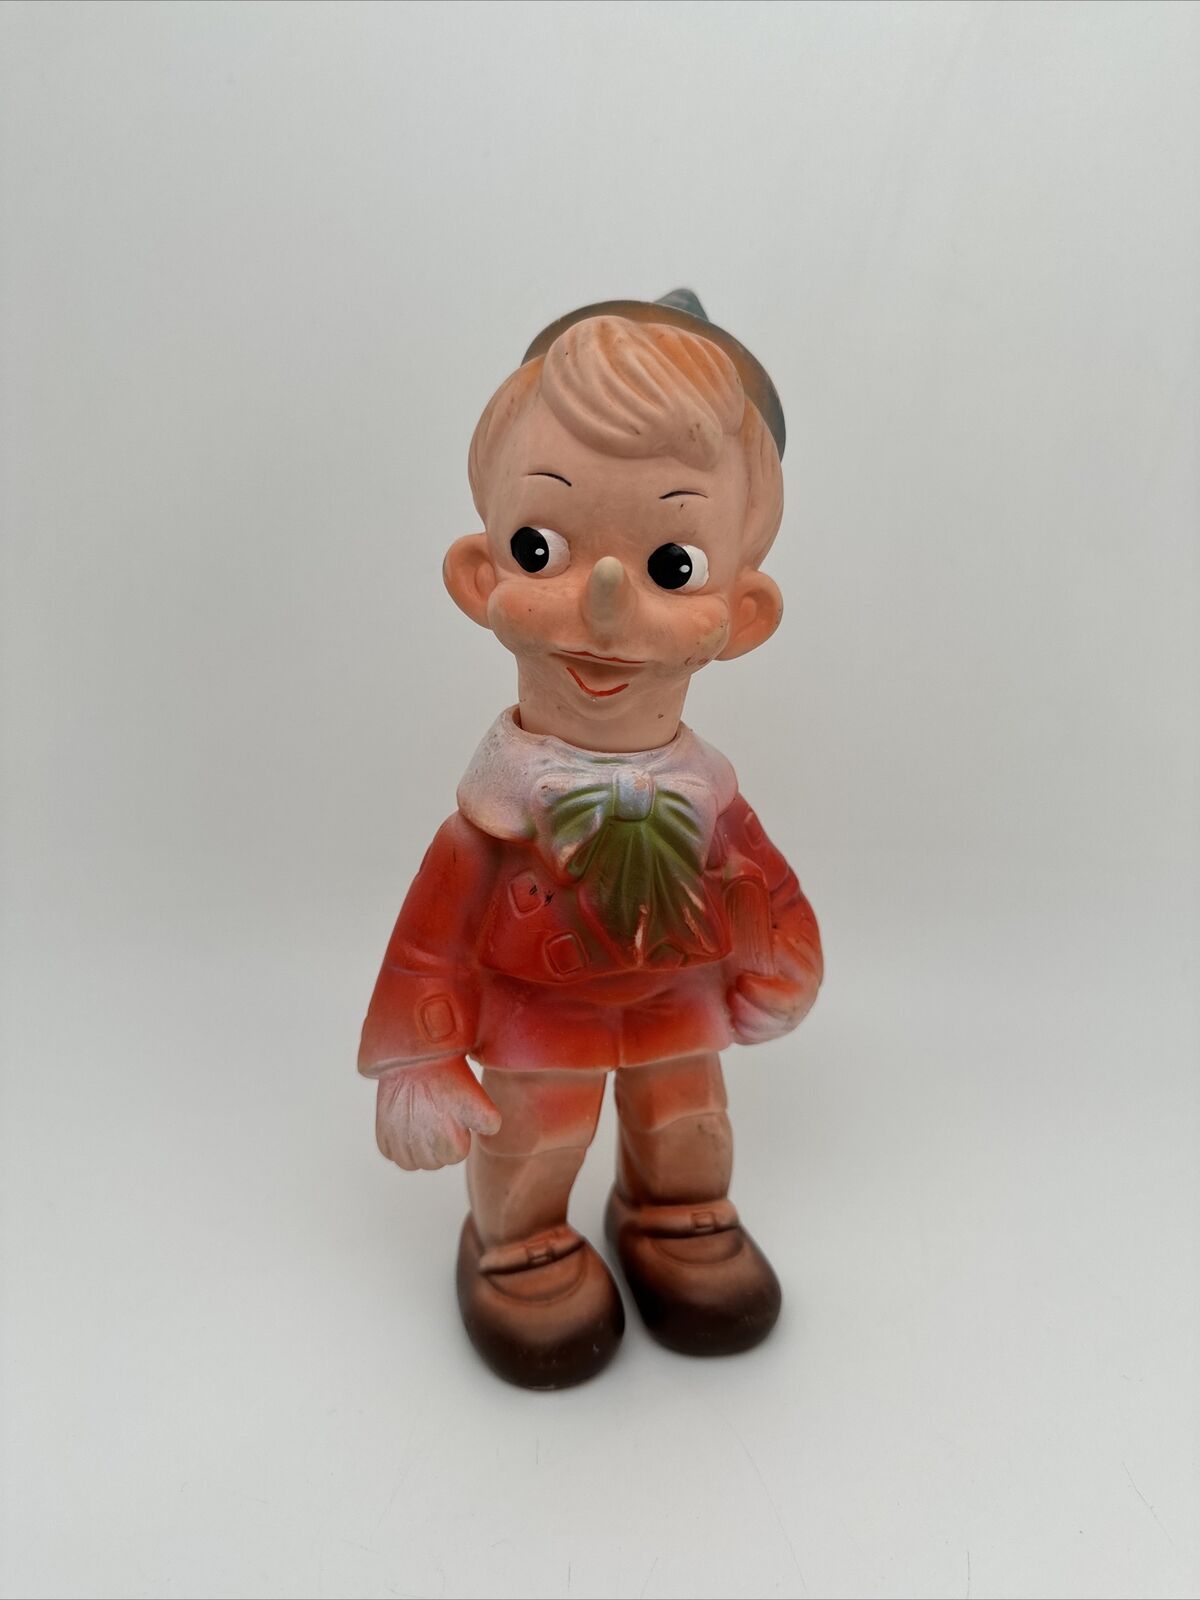 Vintage Pinocchio Toy By Brev Made In Italy Rubber Toy 1950s Era- 9In …103